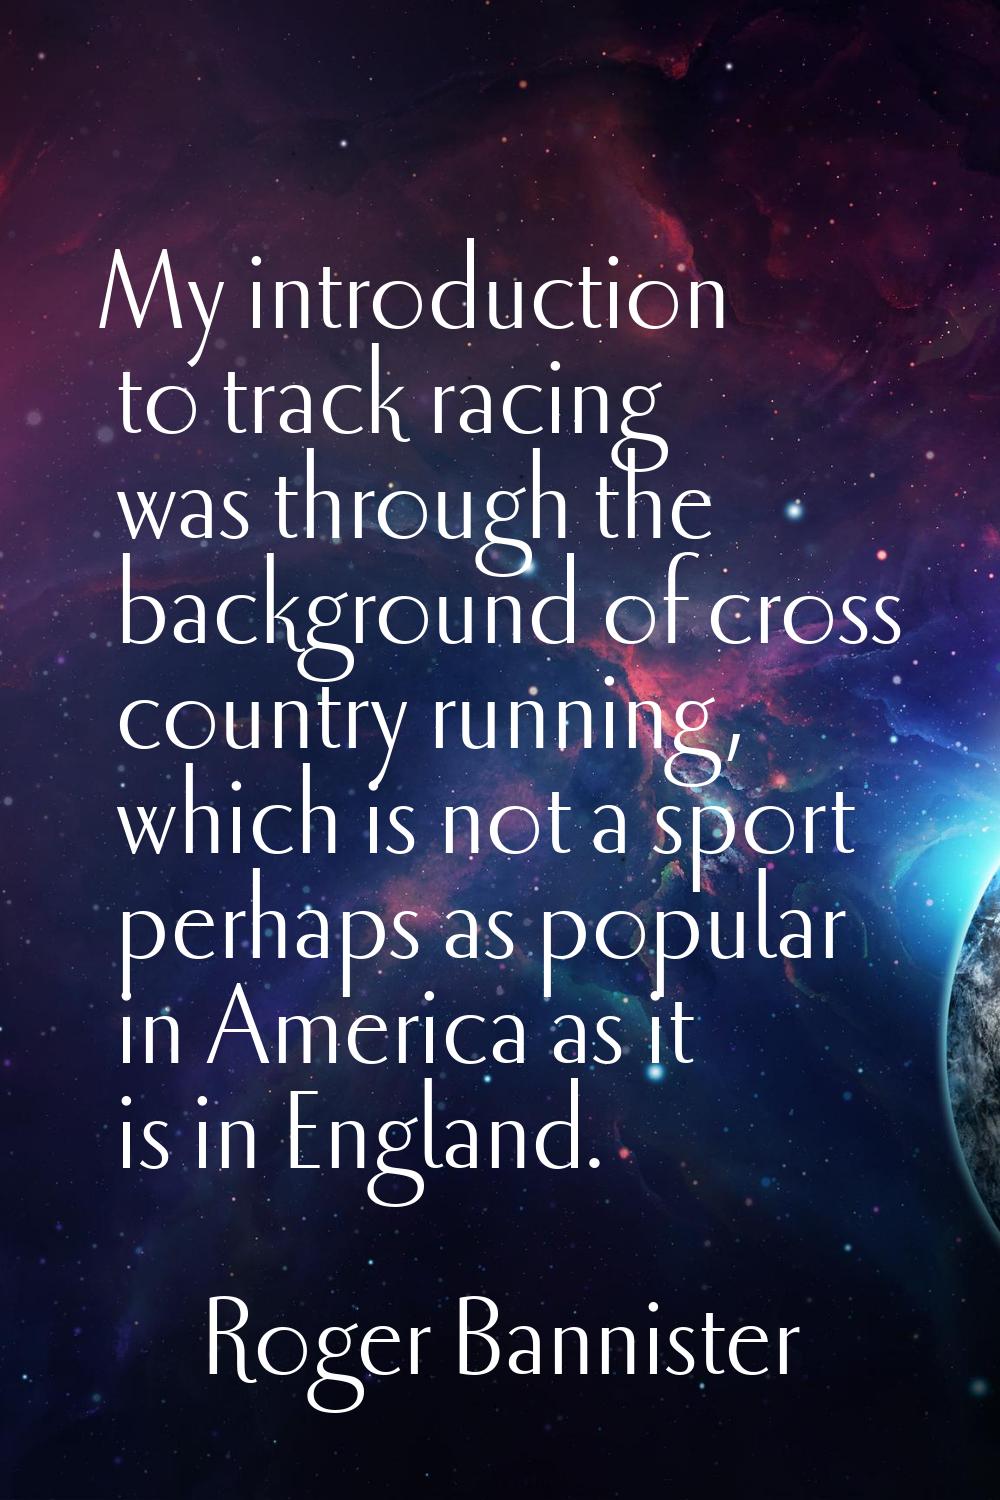 My introduction to track racing was through the background of cross country running, which is not a